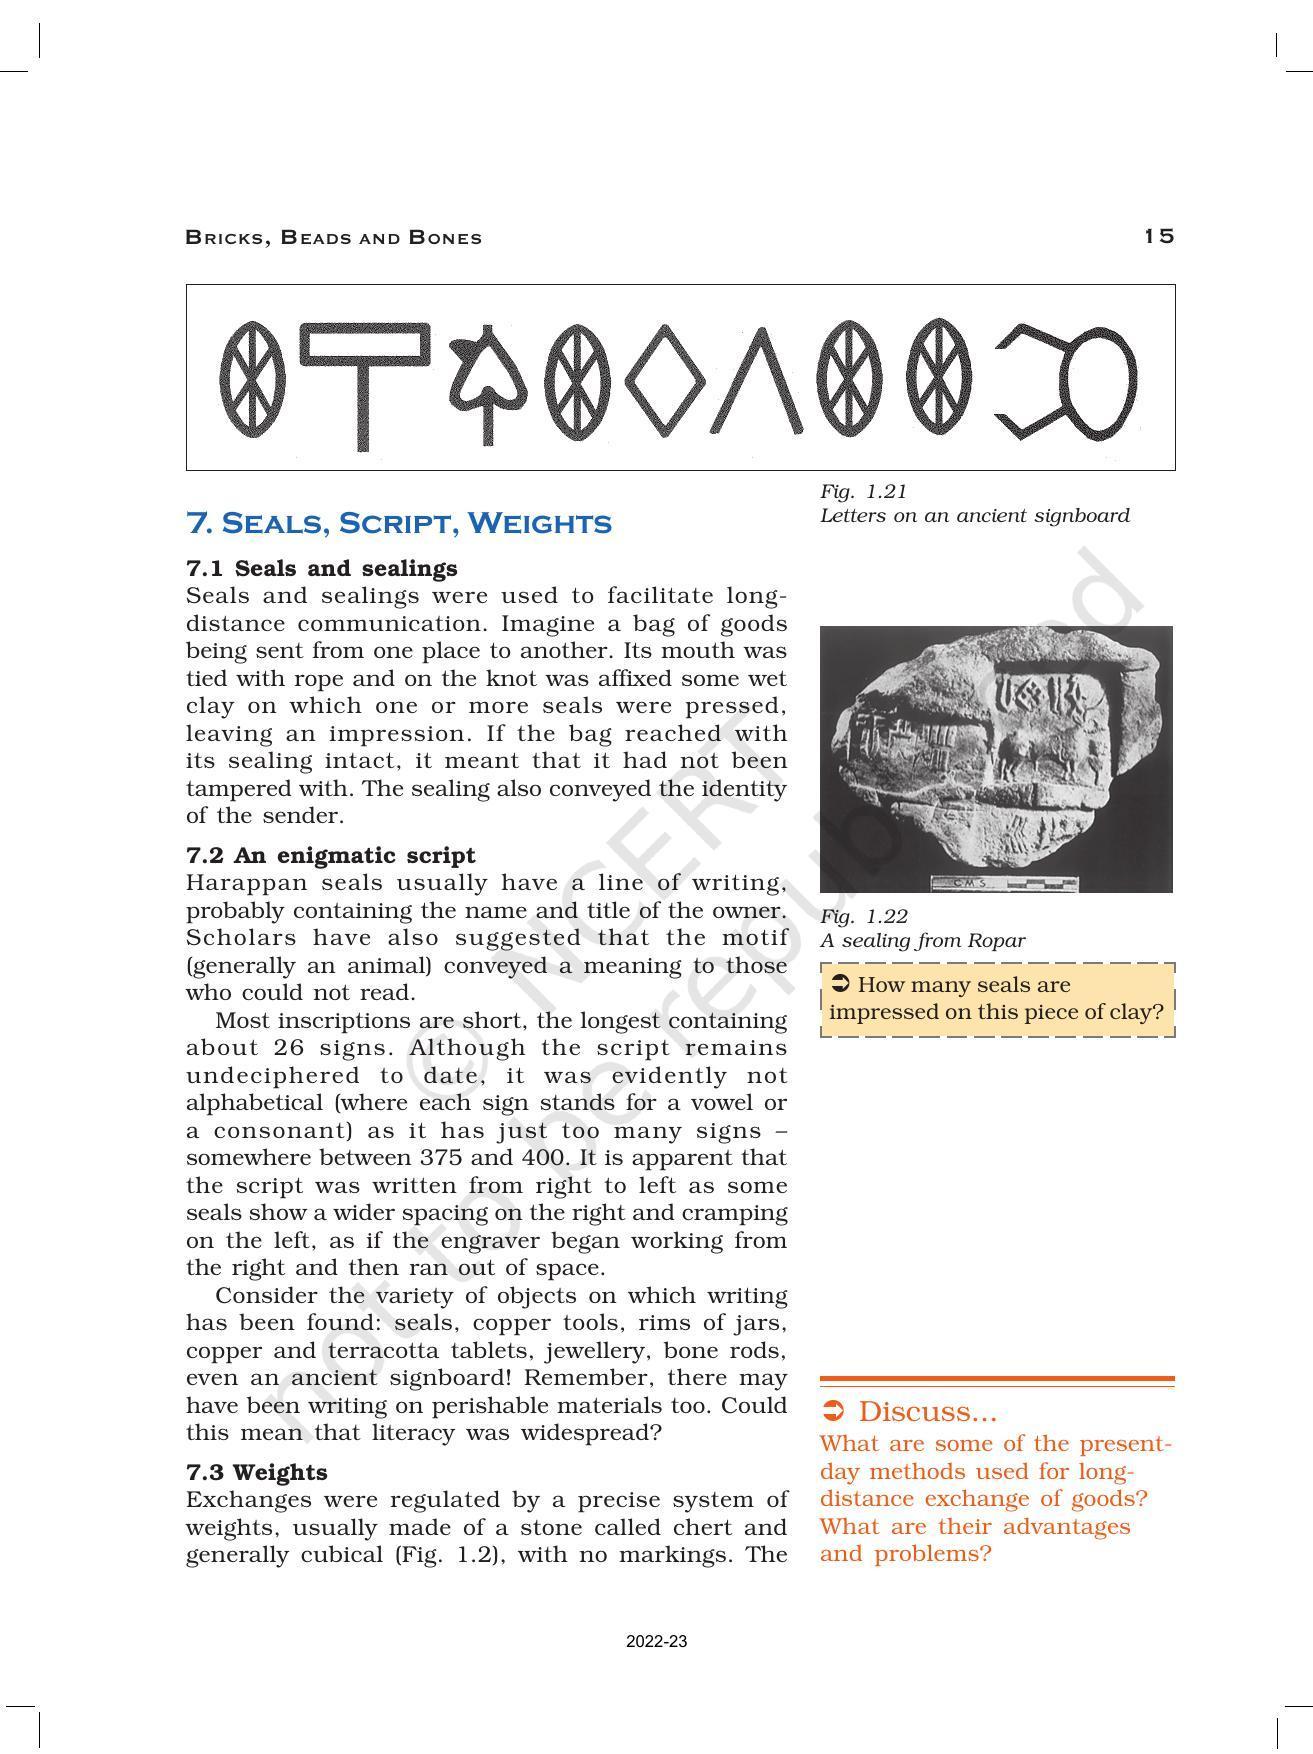 NCERT Book for Class 12 History (Part-1) Chapter 1 Bricks, Beads, and Bones - Page 15